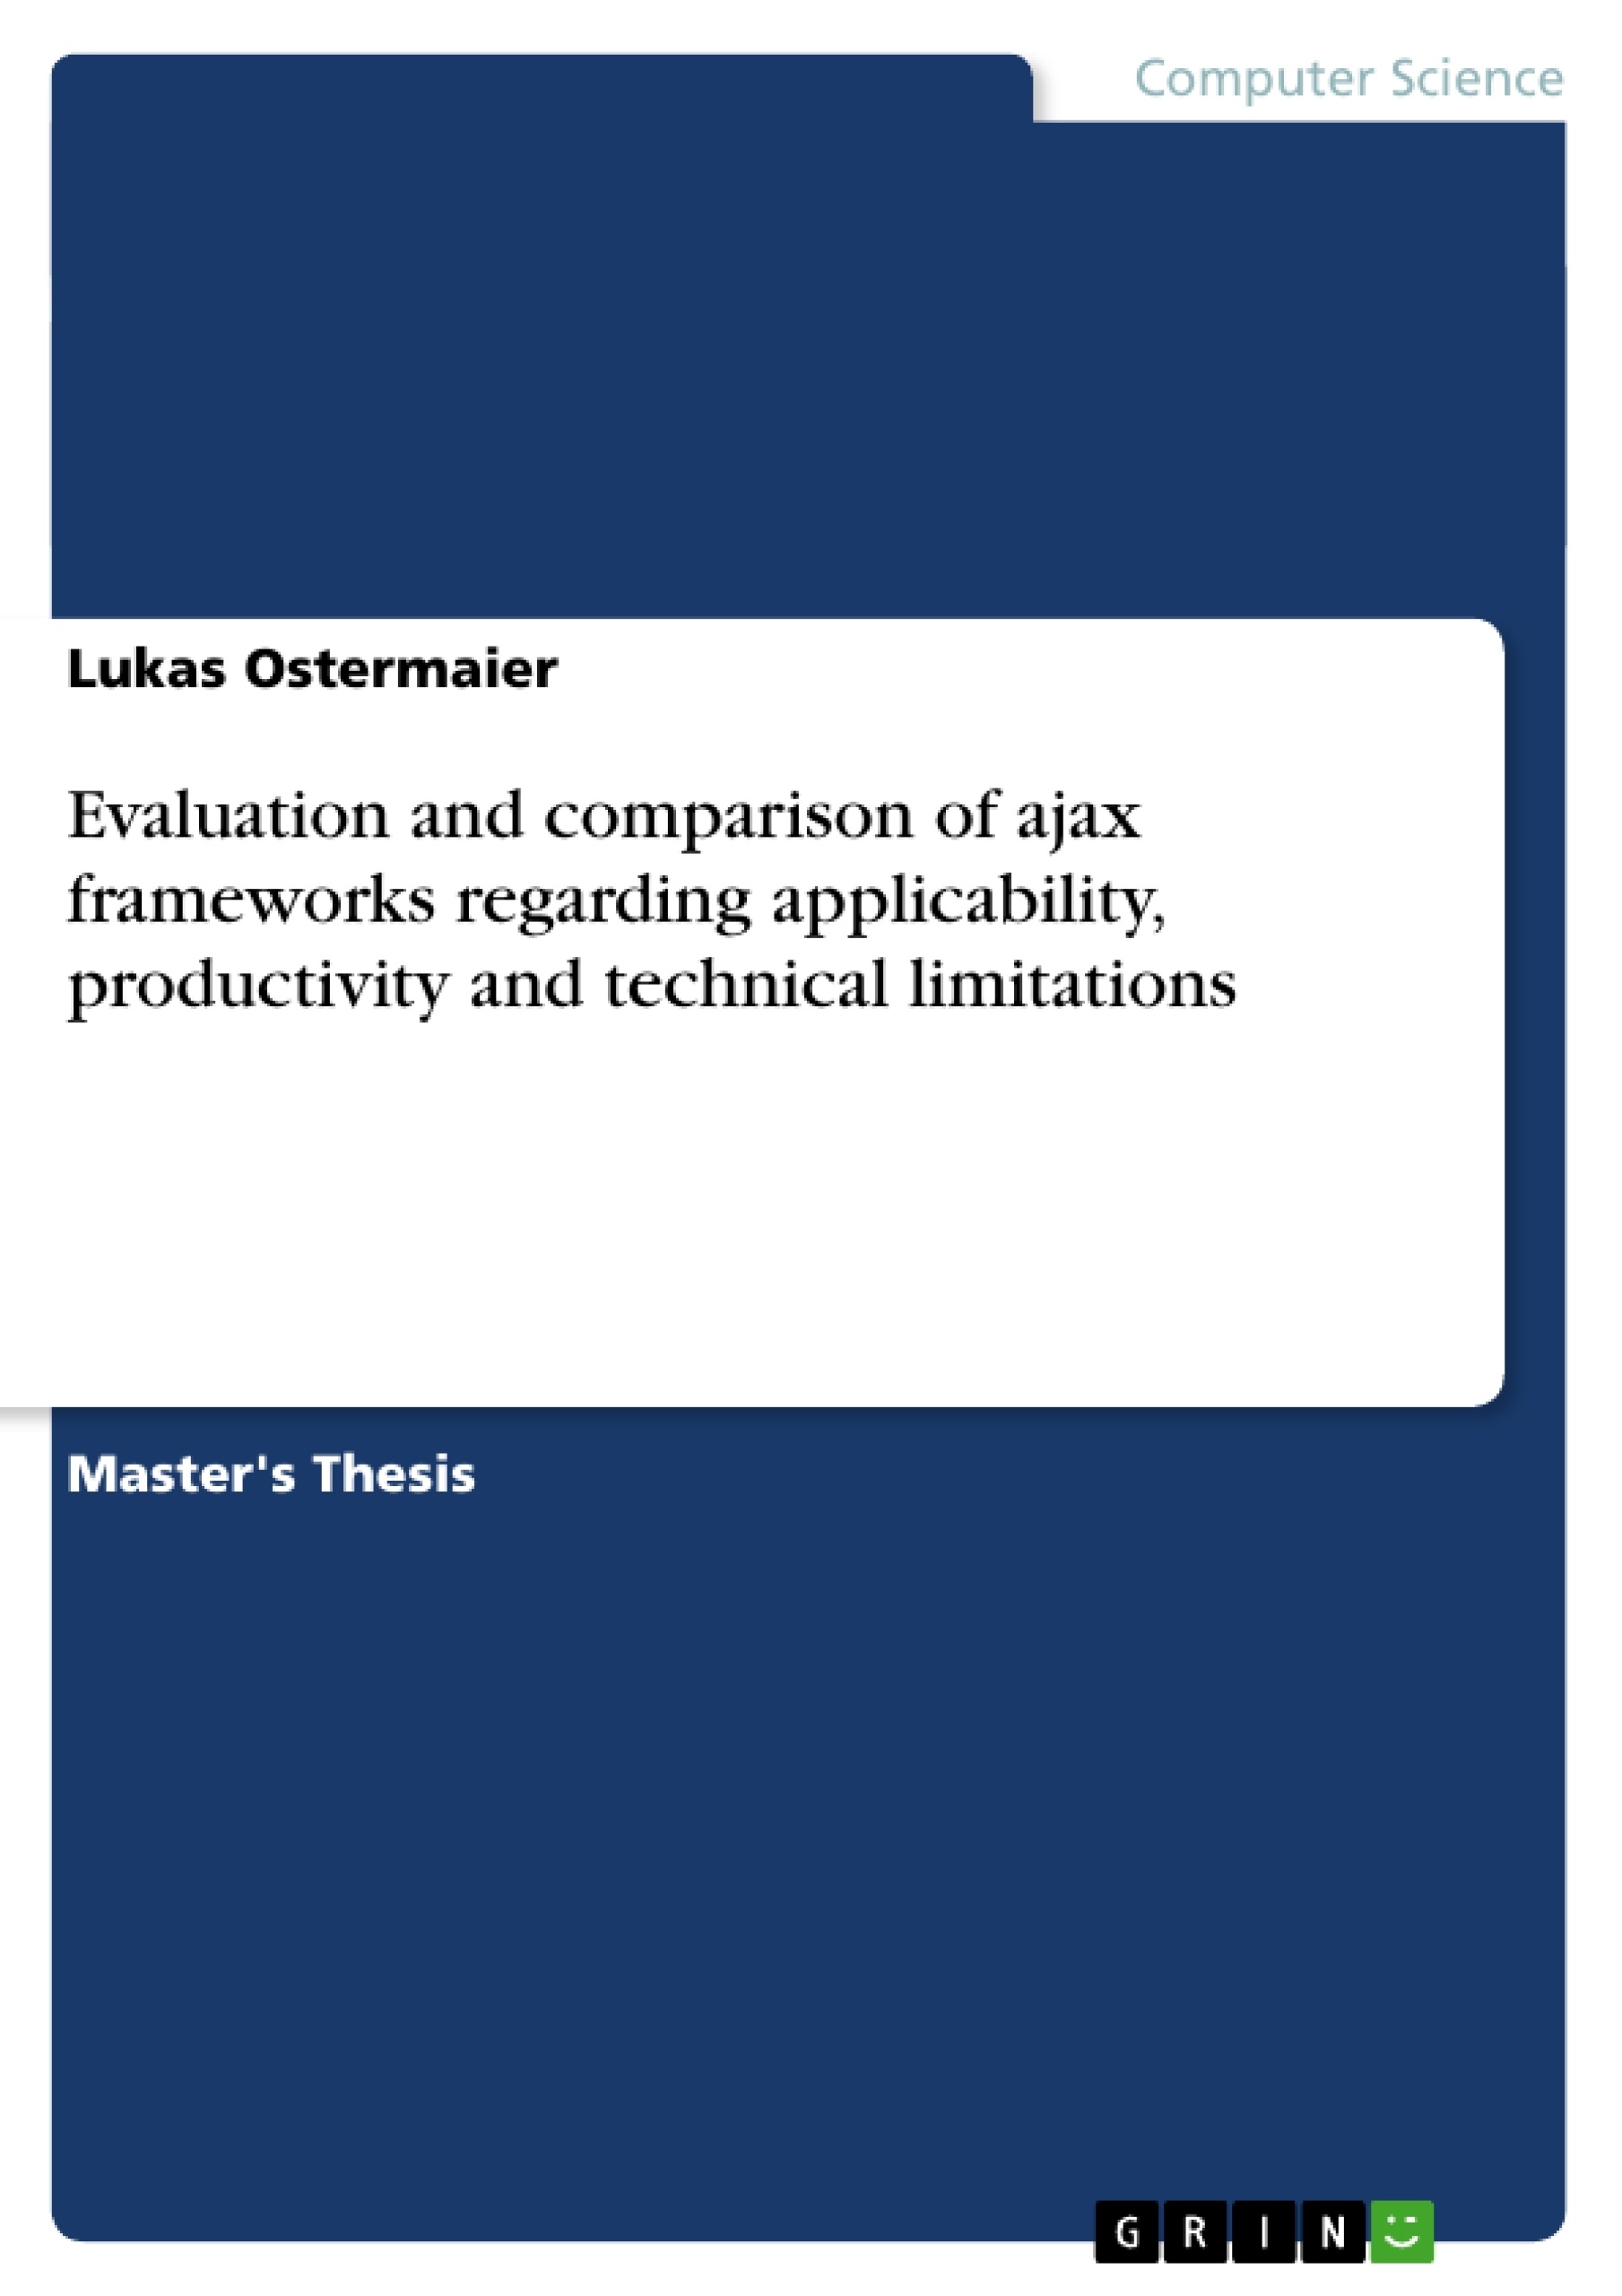 Title: Evaluation and comparison of ajax frameworks regarding applicability, productivity and technical limitations